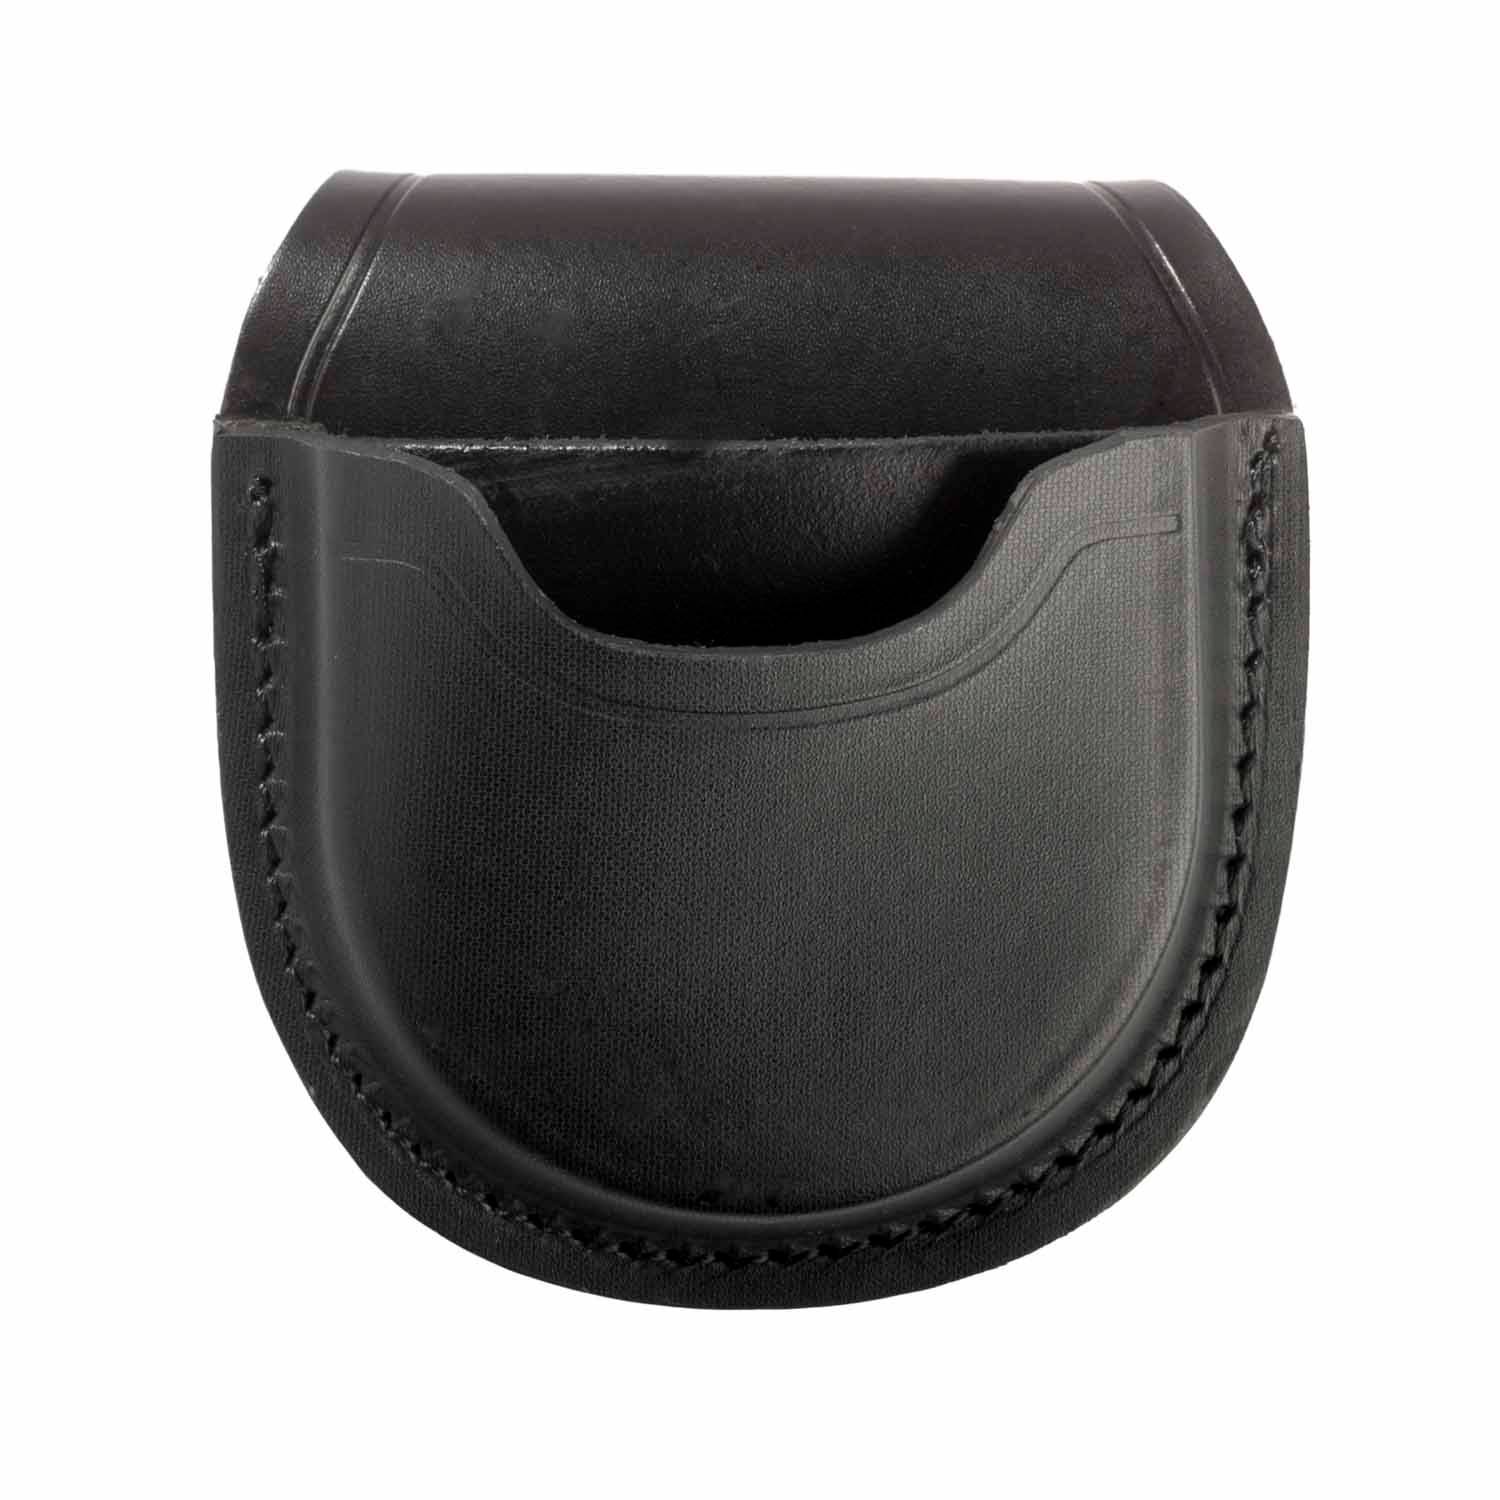 Galls Leather Open Top cuff Case